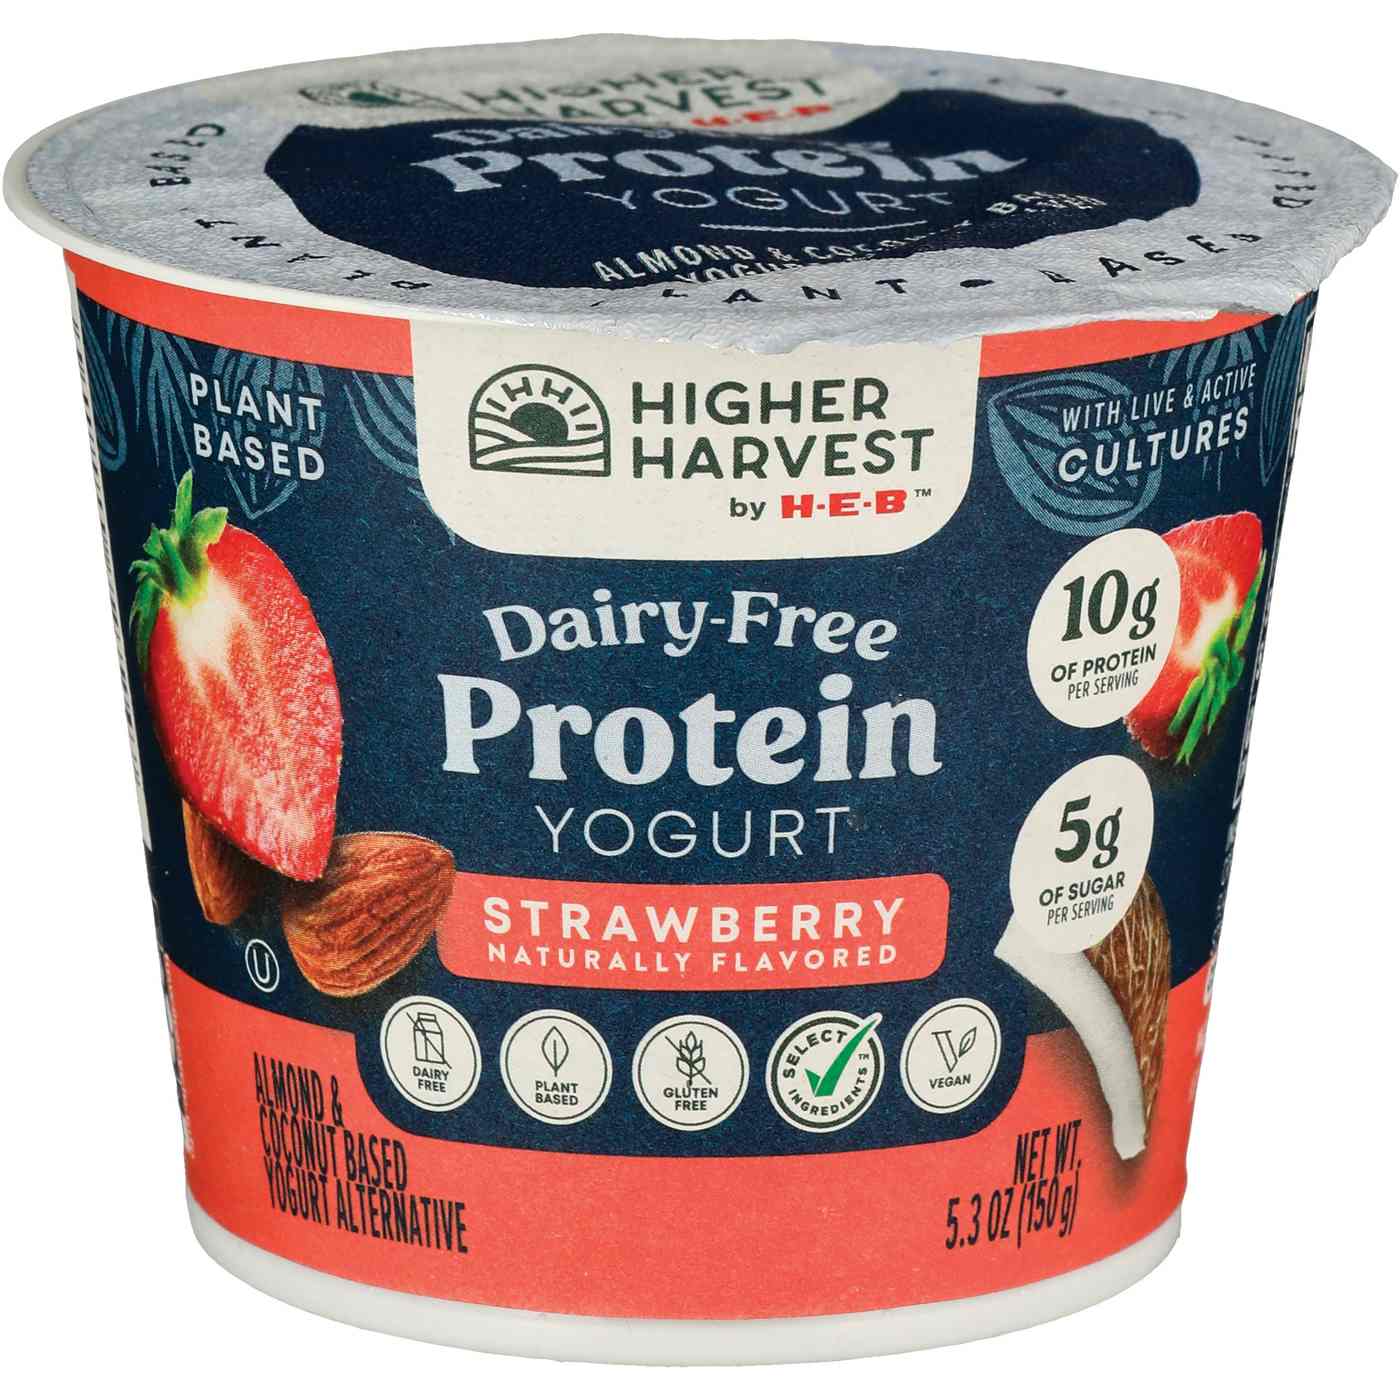 Higher Harvest by H-E-B Dairy Free Protein Yogurt – Strawberry; image 3 of 3